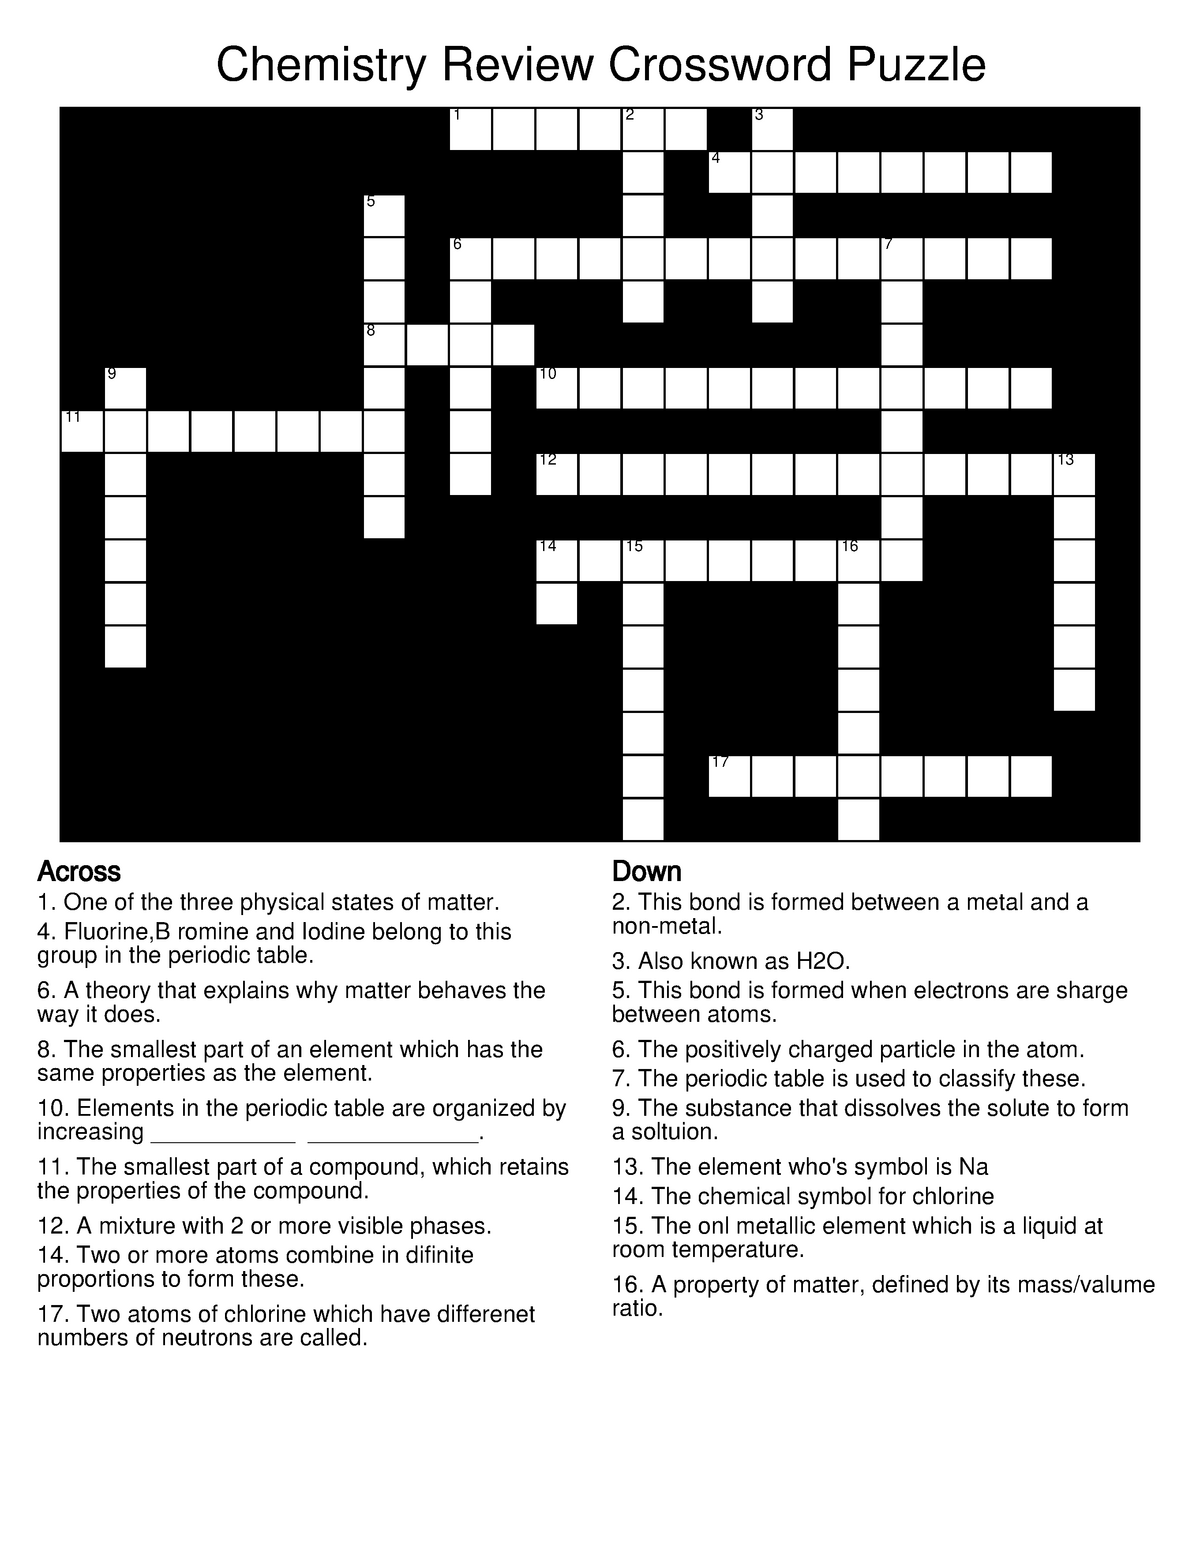 Chemistry Review Crossword Review page for final exam on June 22 be